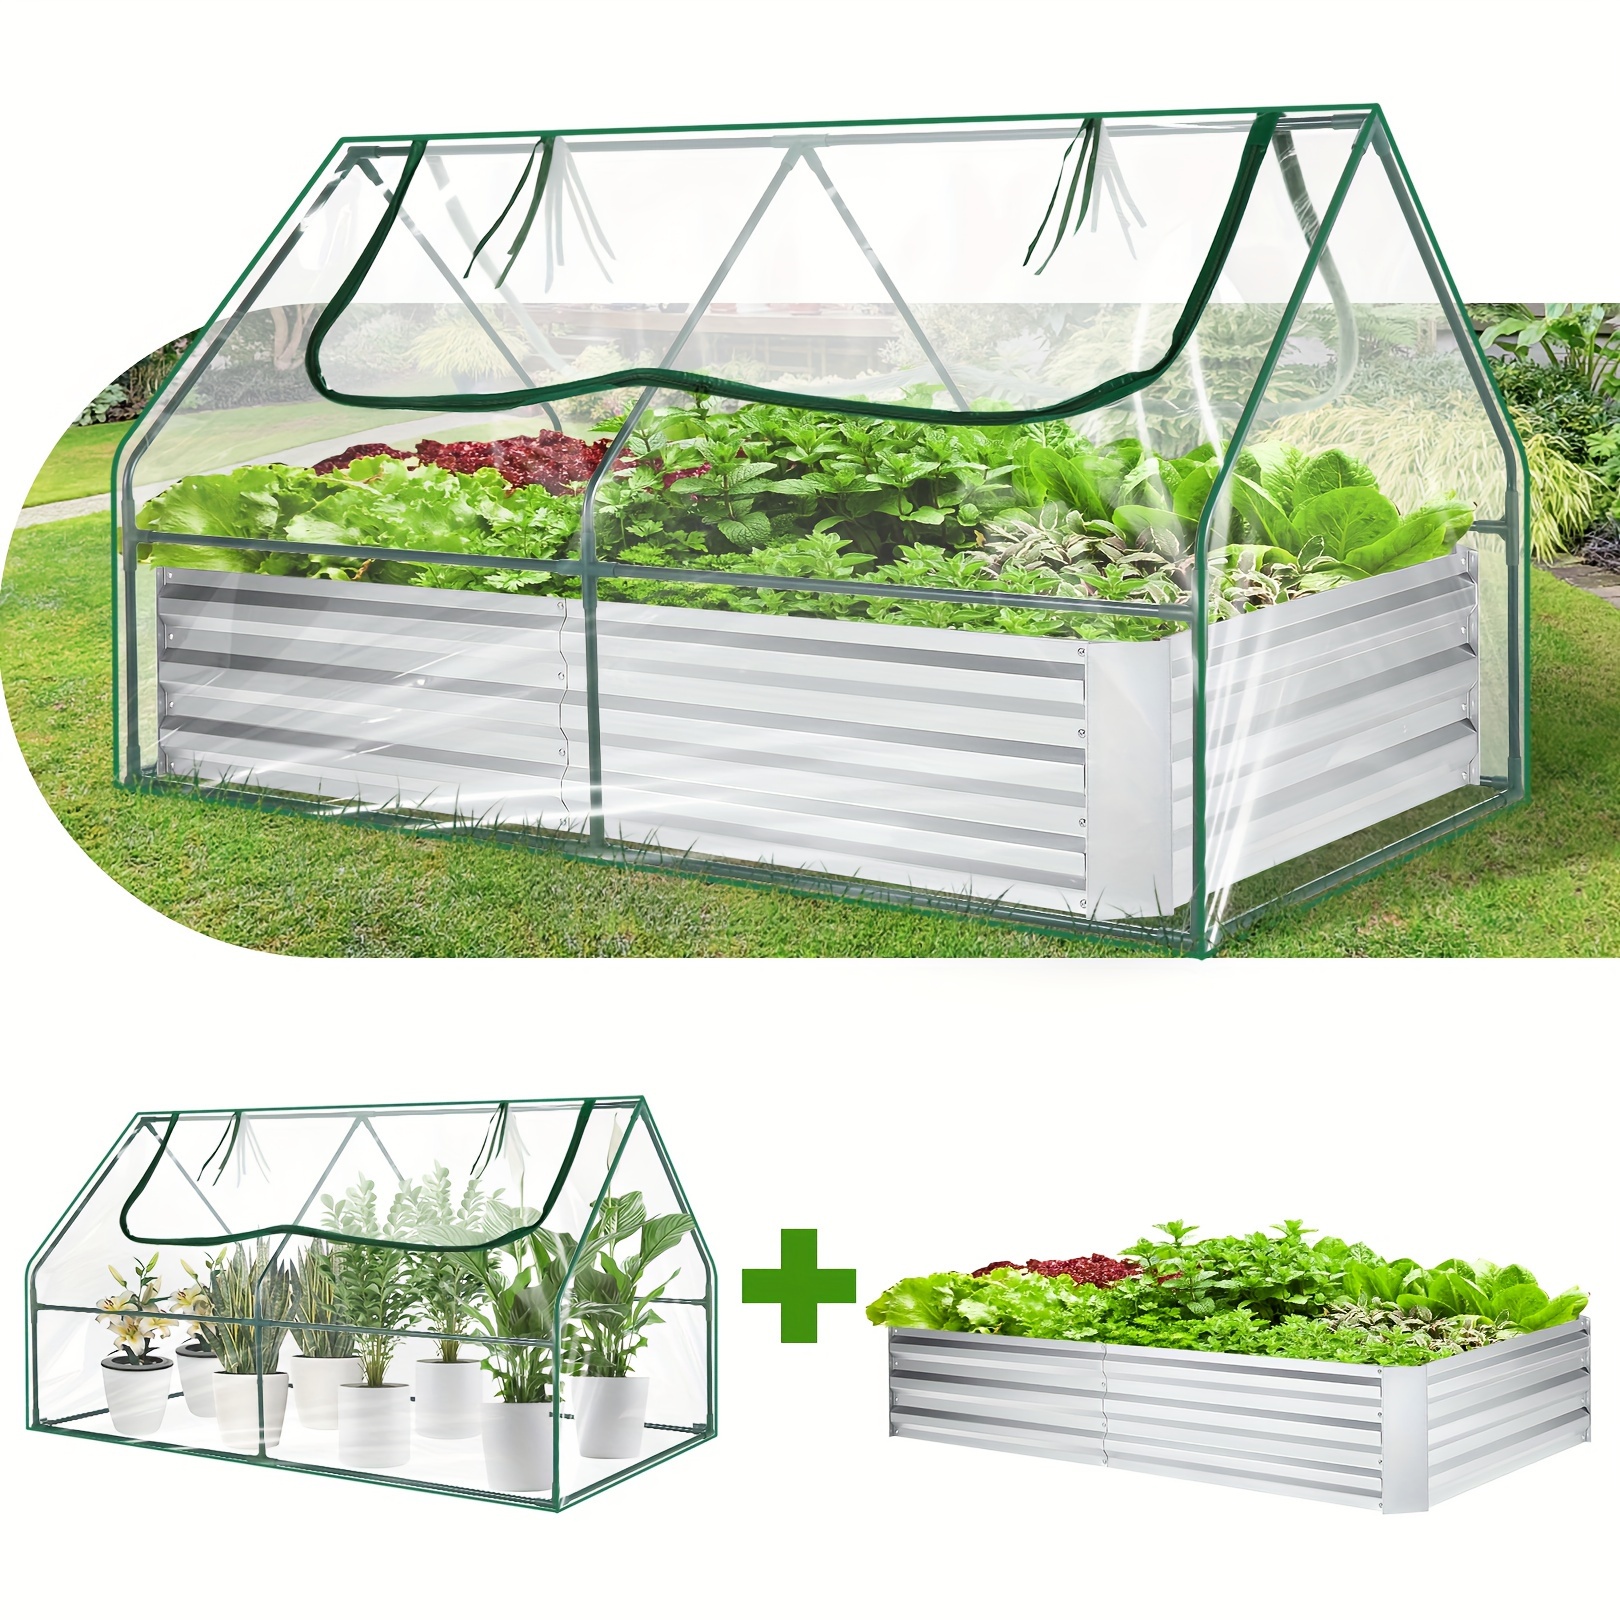 

Galvanized Raised Garden Bed With Cover, 6x3x3ft, Outdoor Metal Planter Box 2 Roll-up Windows Mini Greenhouse For Growing Flowers Fruits Vegetables And Herbs - Clear